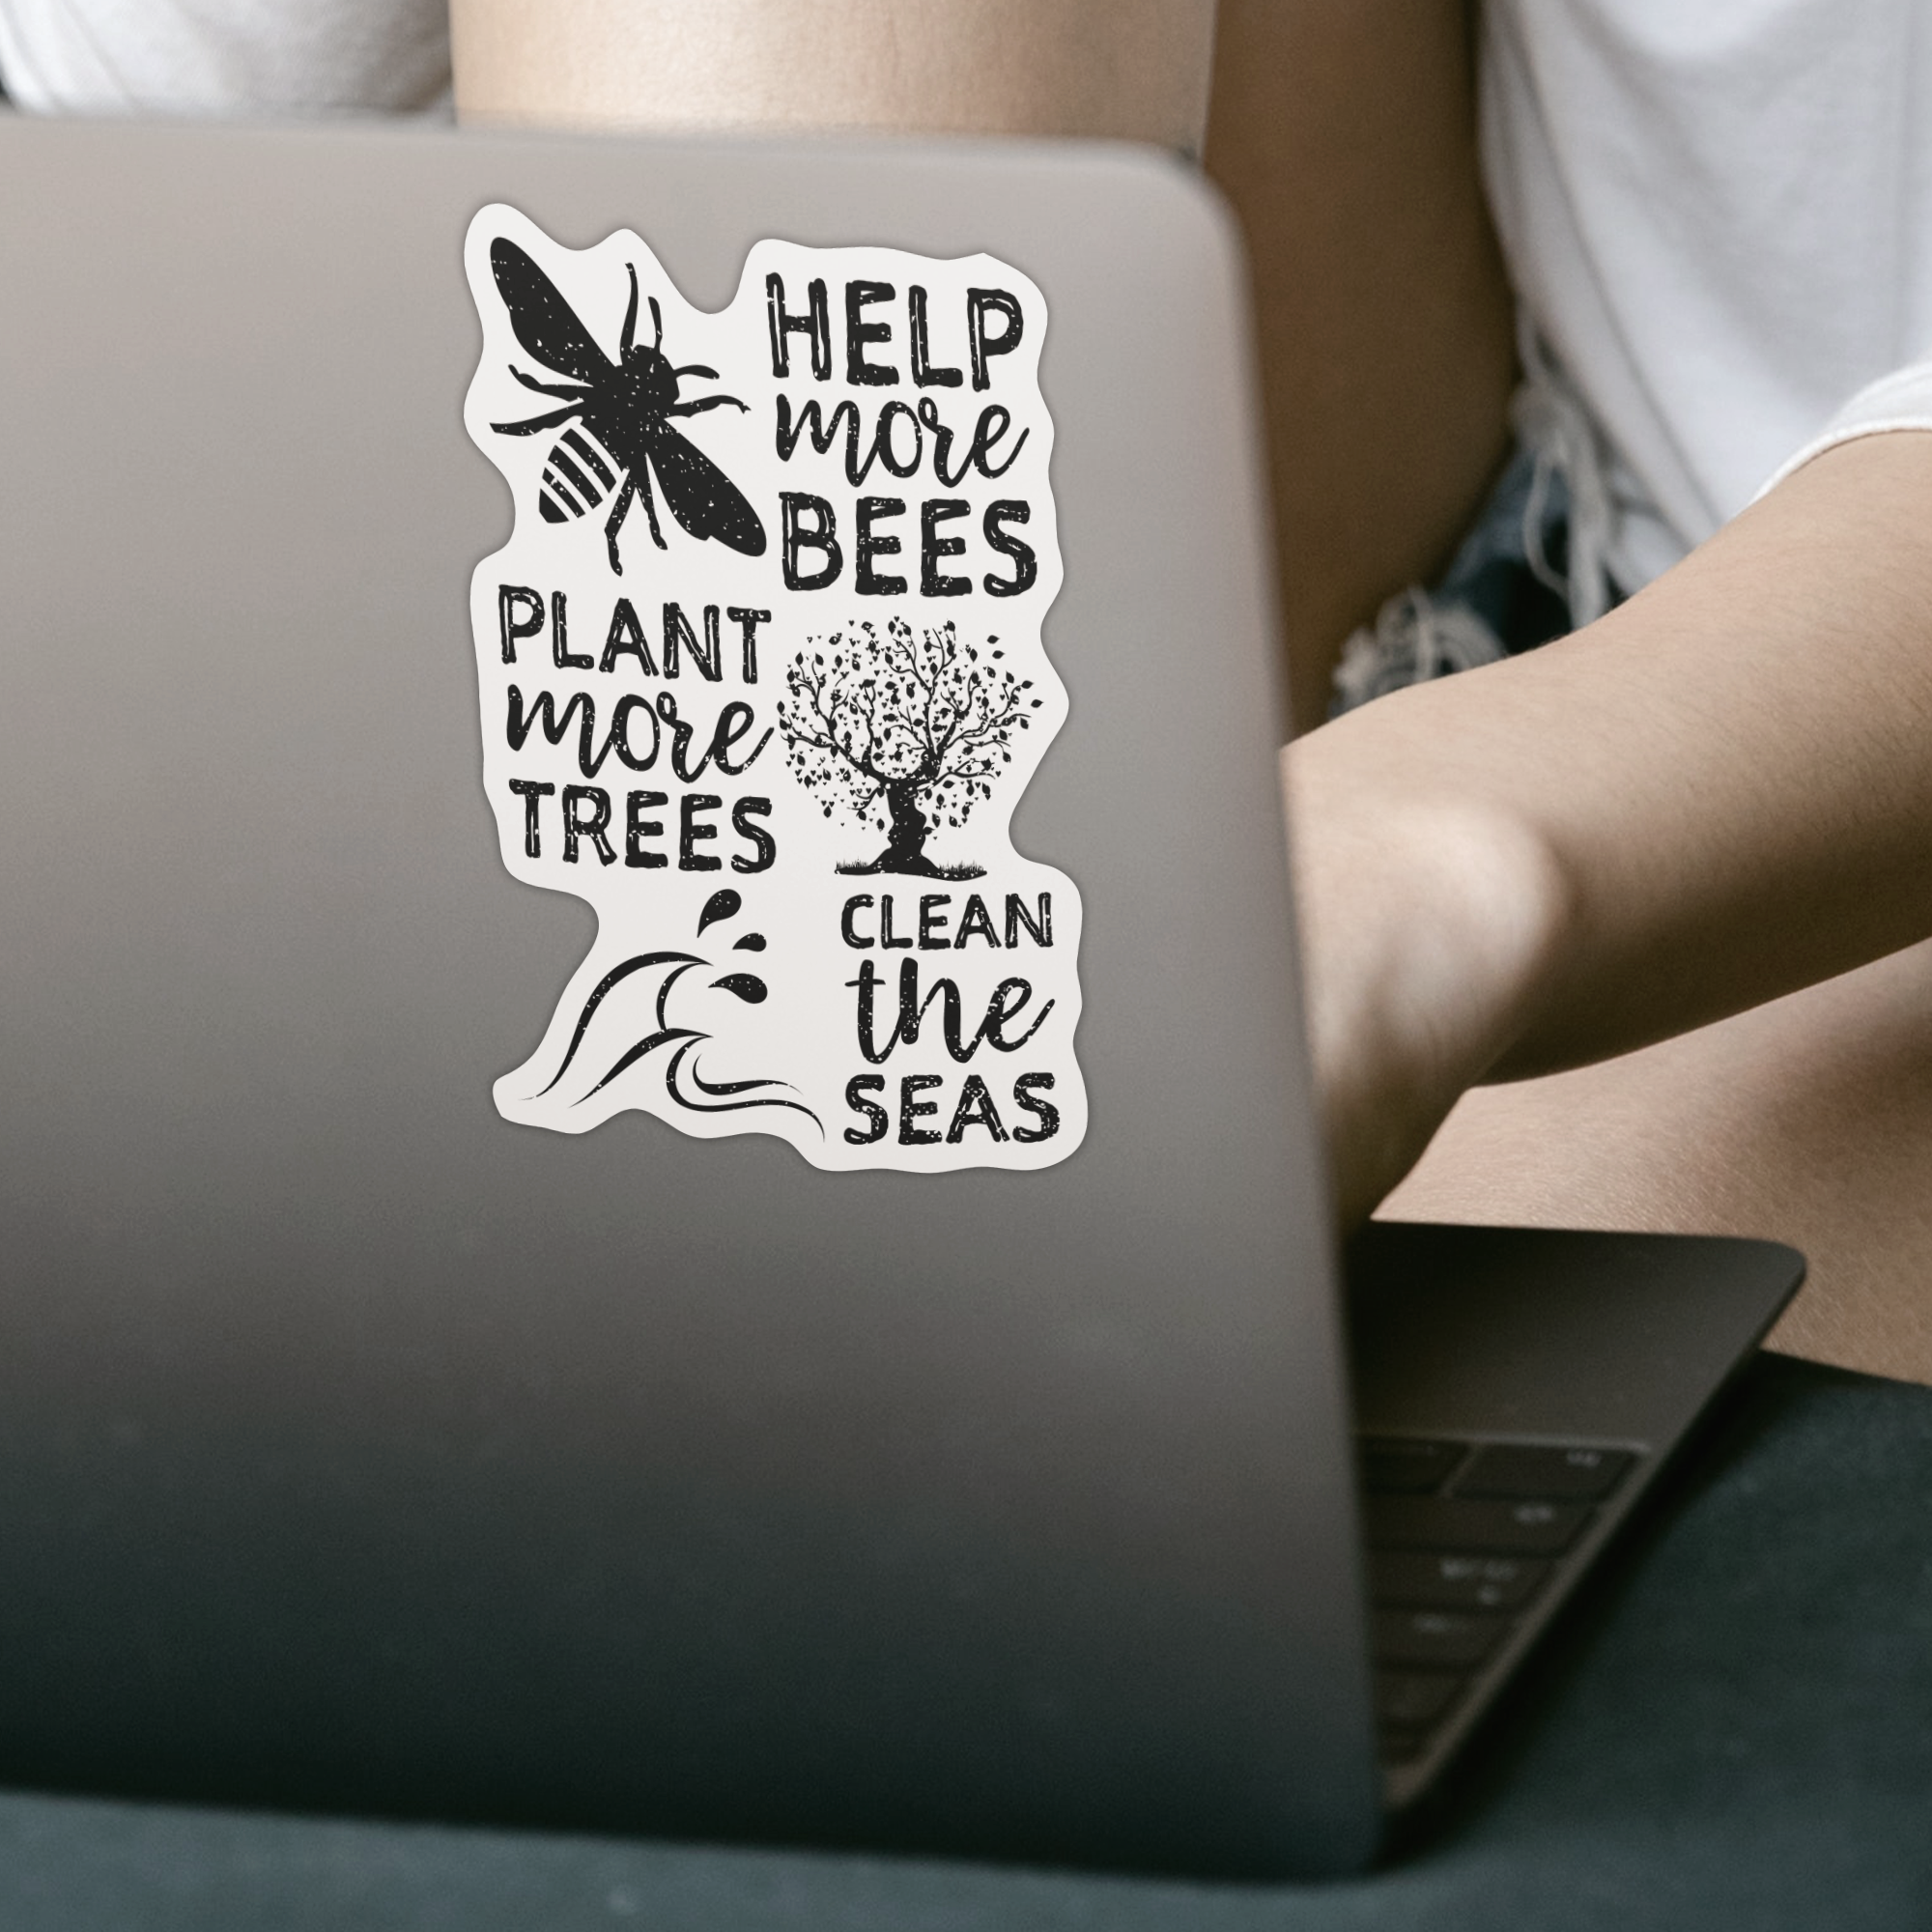 Help More Bees Plant More Trees Clean The Seas Sticker - DESIGNSBYJNK5.COM